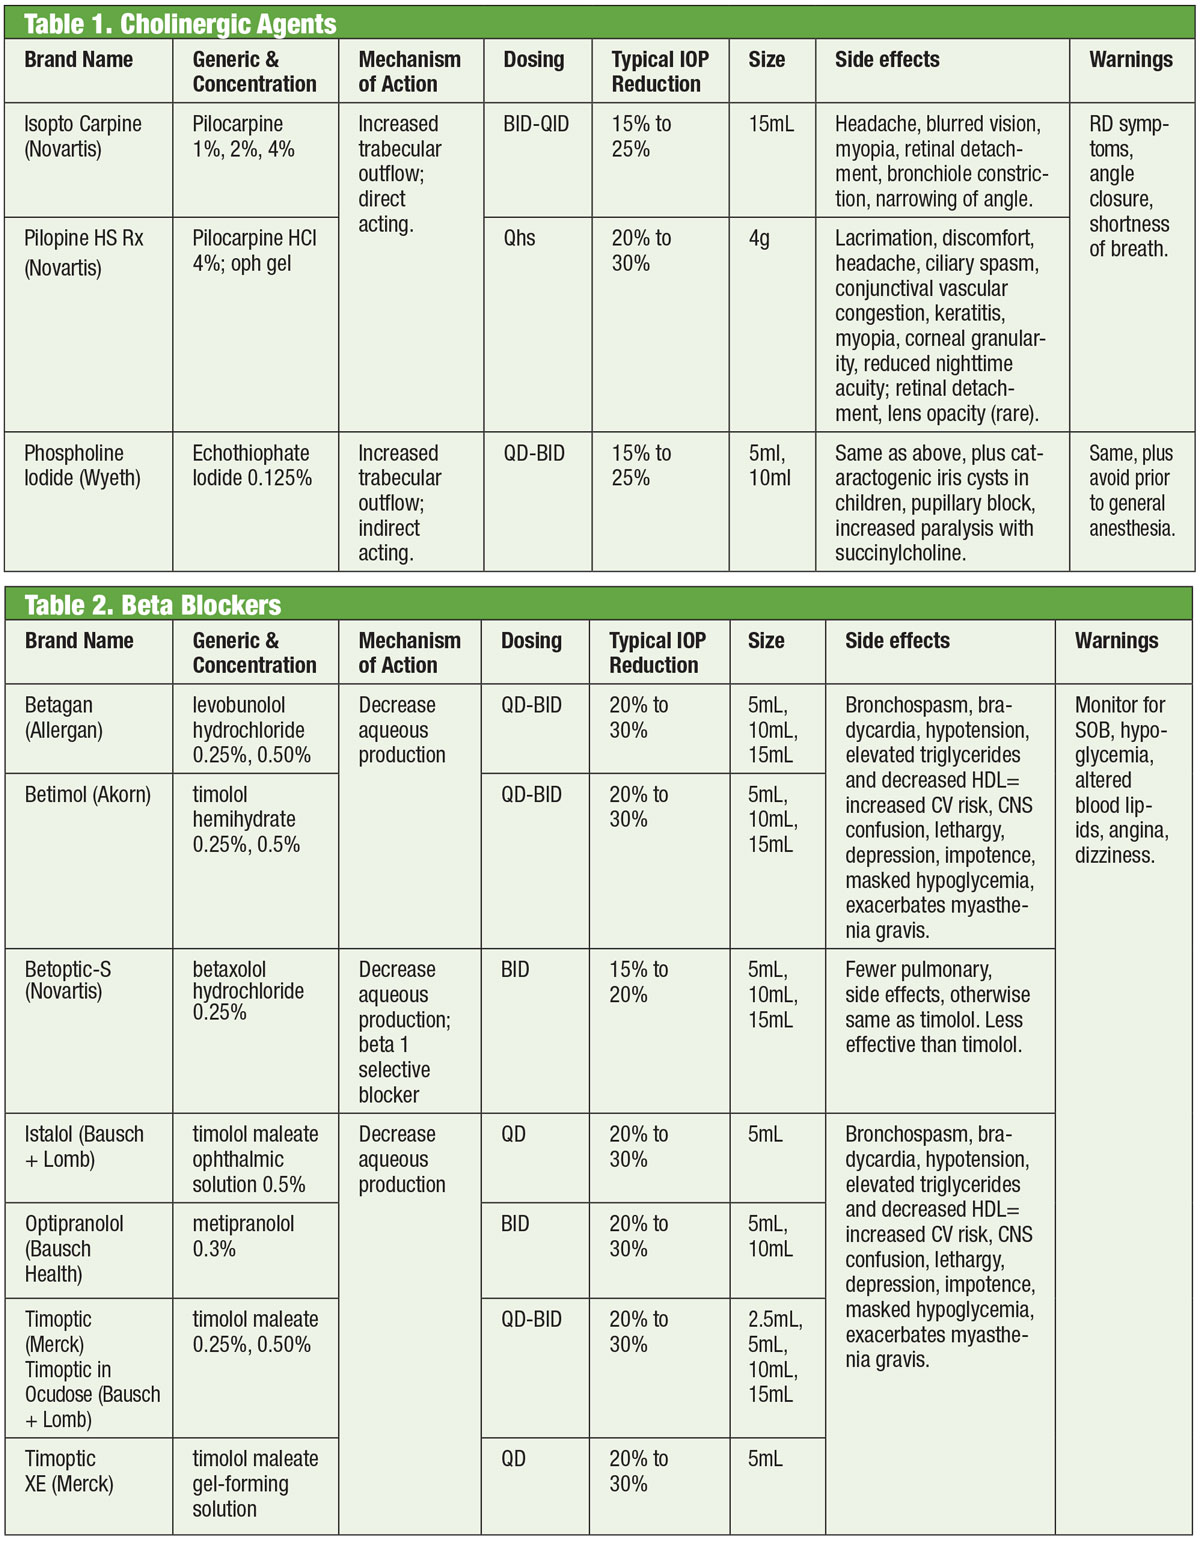 Cholinergic Agents and Beta Blockers